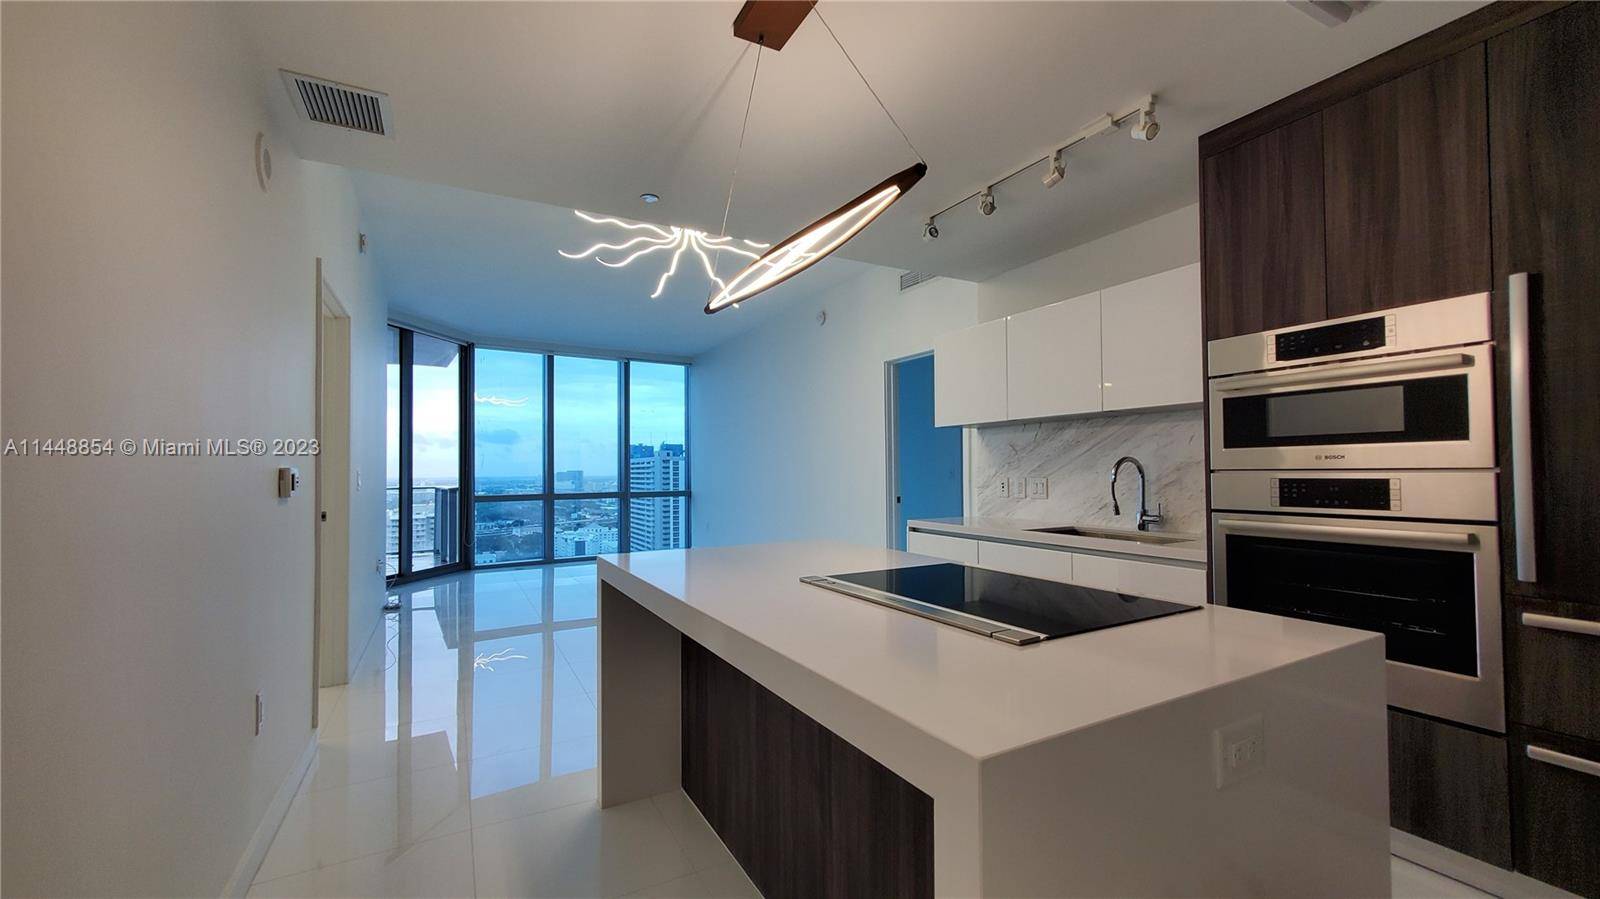 STUNNING RESIDENCE AT PARAMOUNT WORLDCENTER WITH THE BEST AMENITIES IN MIAMI !